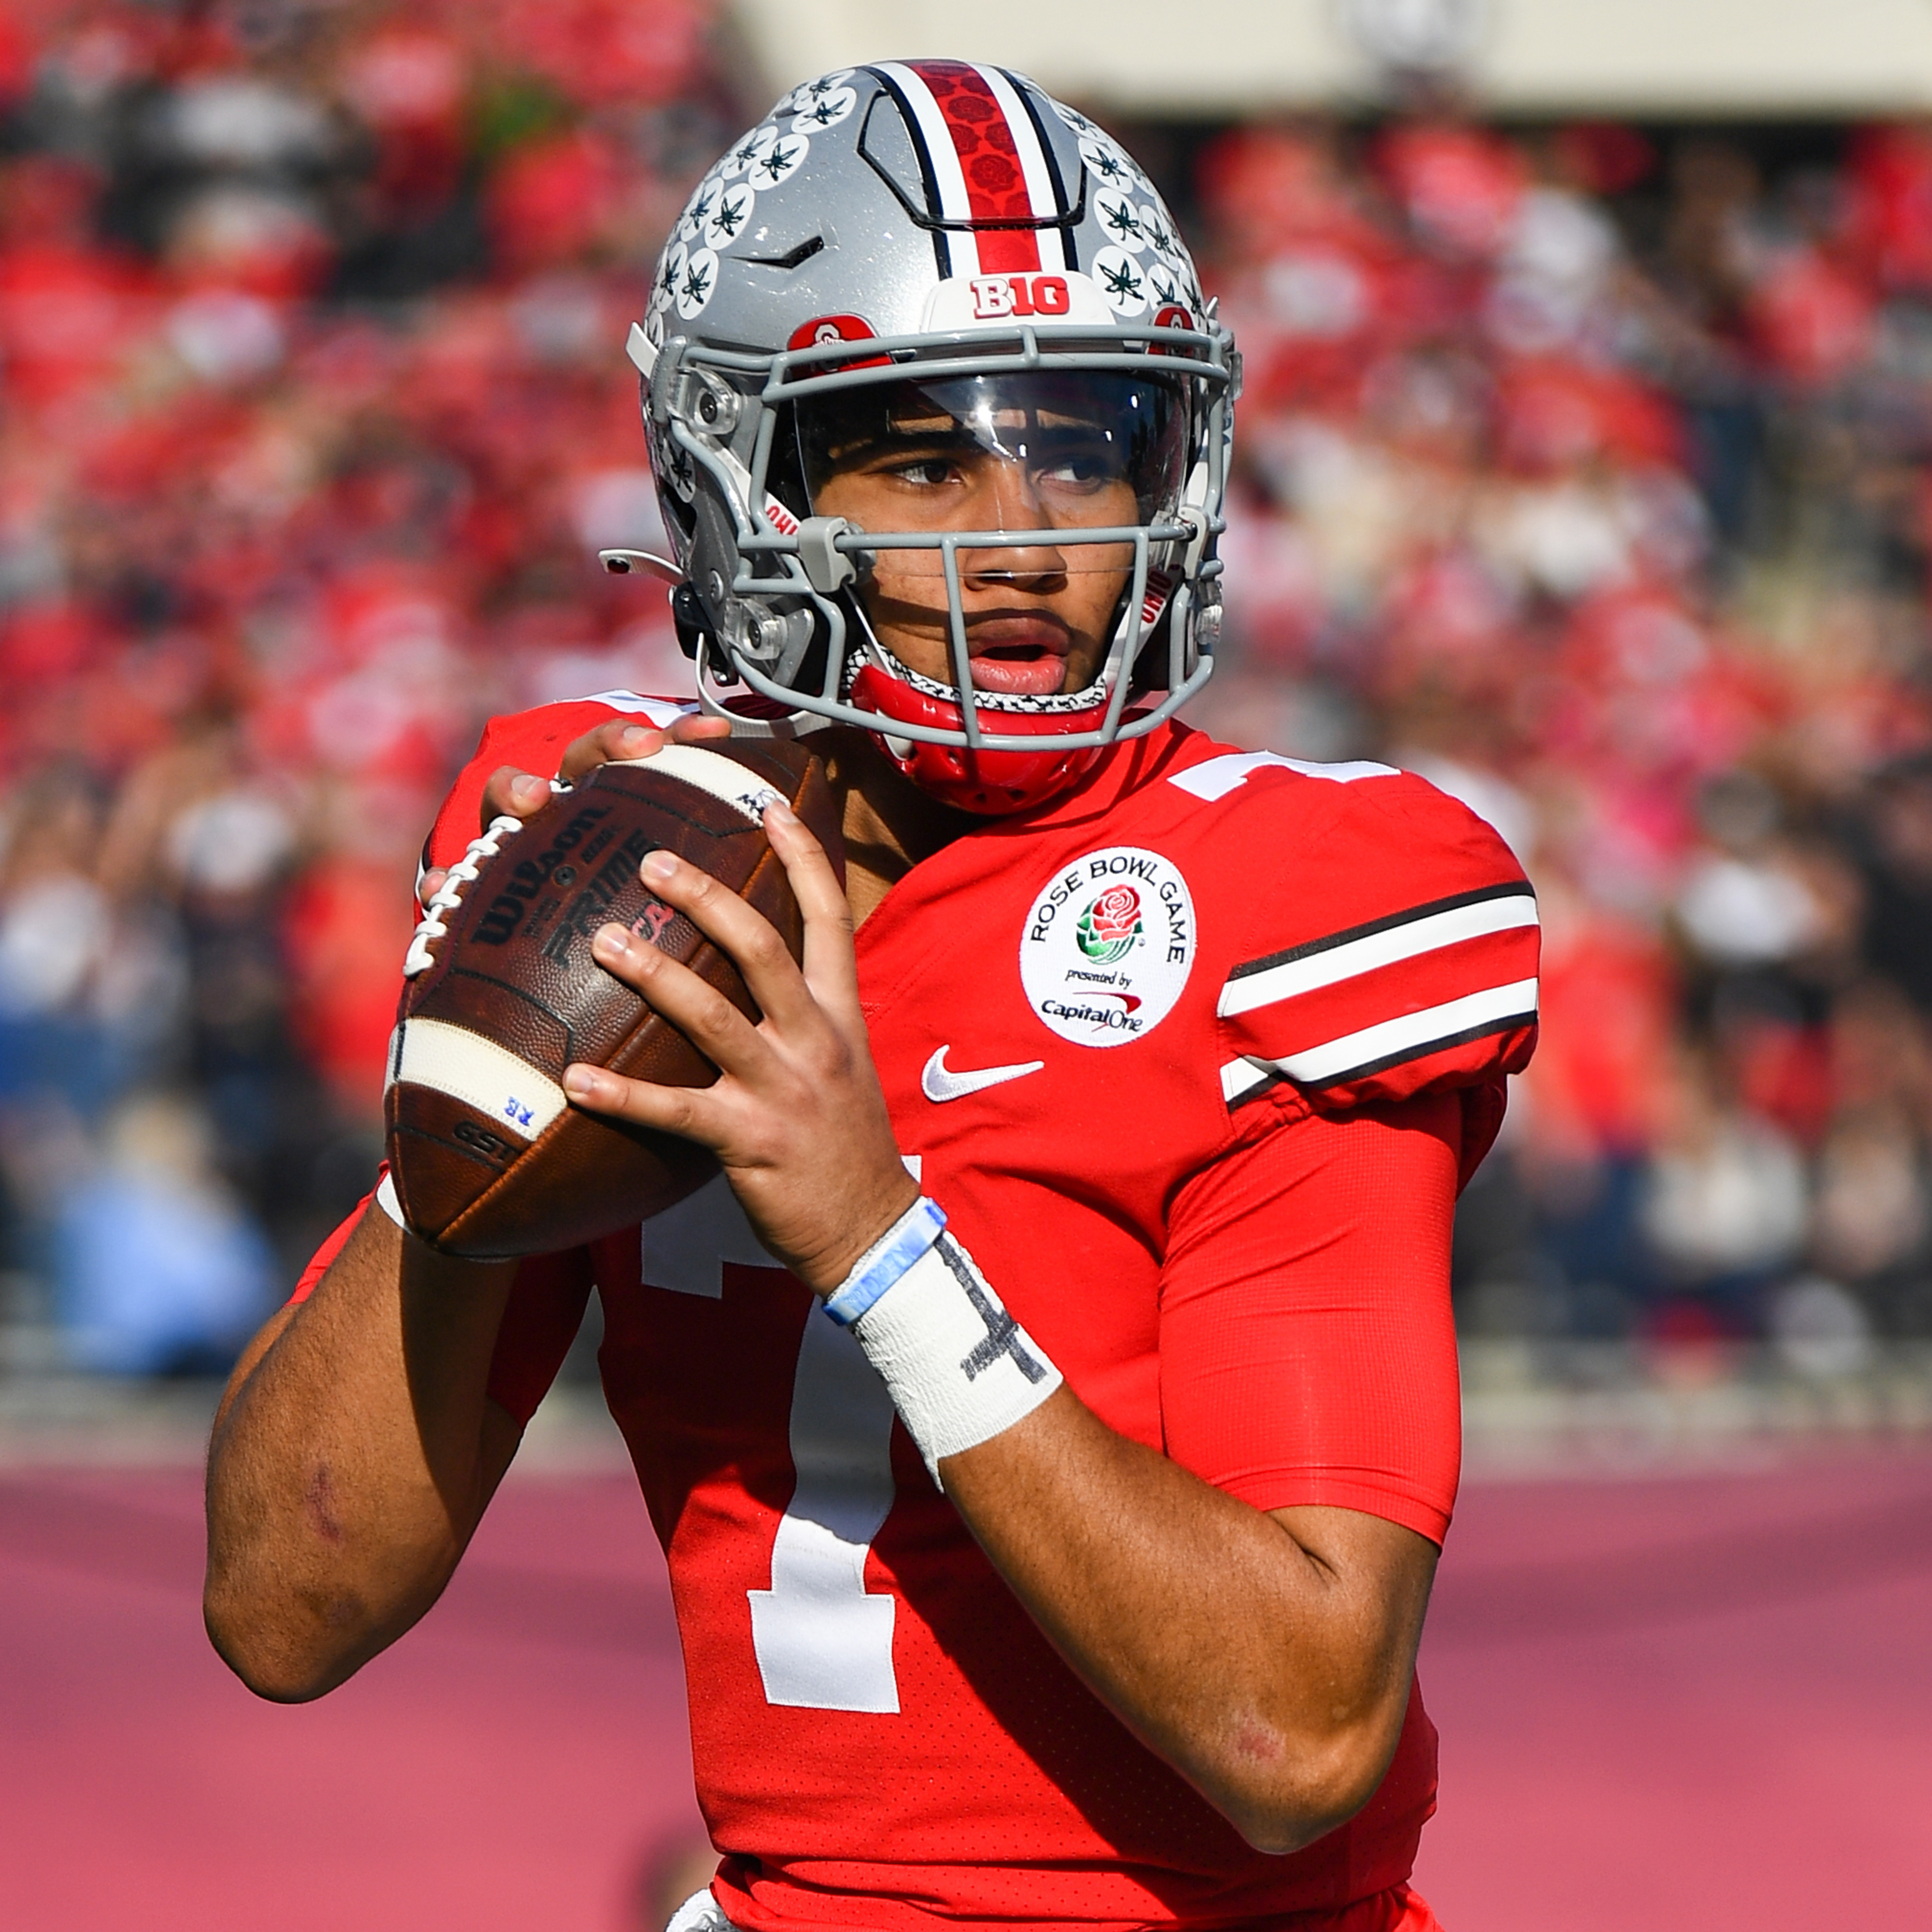 Todd McShay 2023 NFL Mock Draft: C.J. Stroud, Bryce Young Go Top 2; Giants Land QB